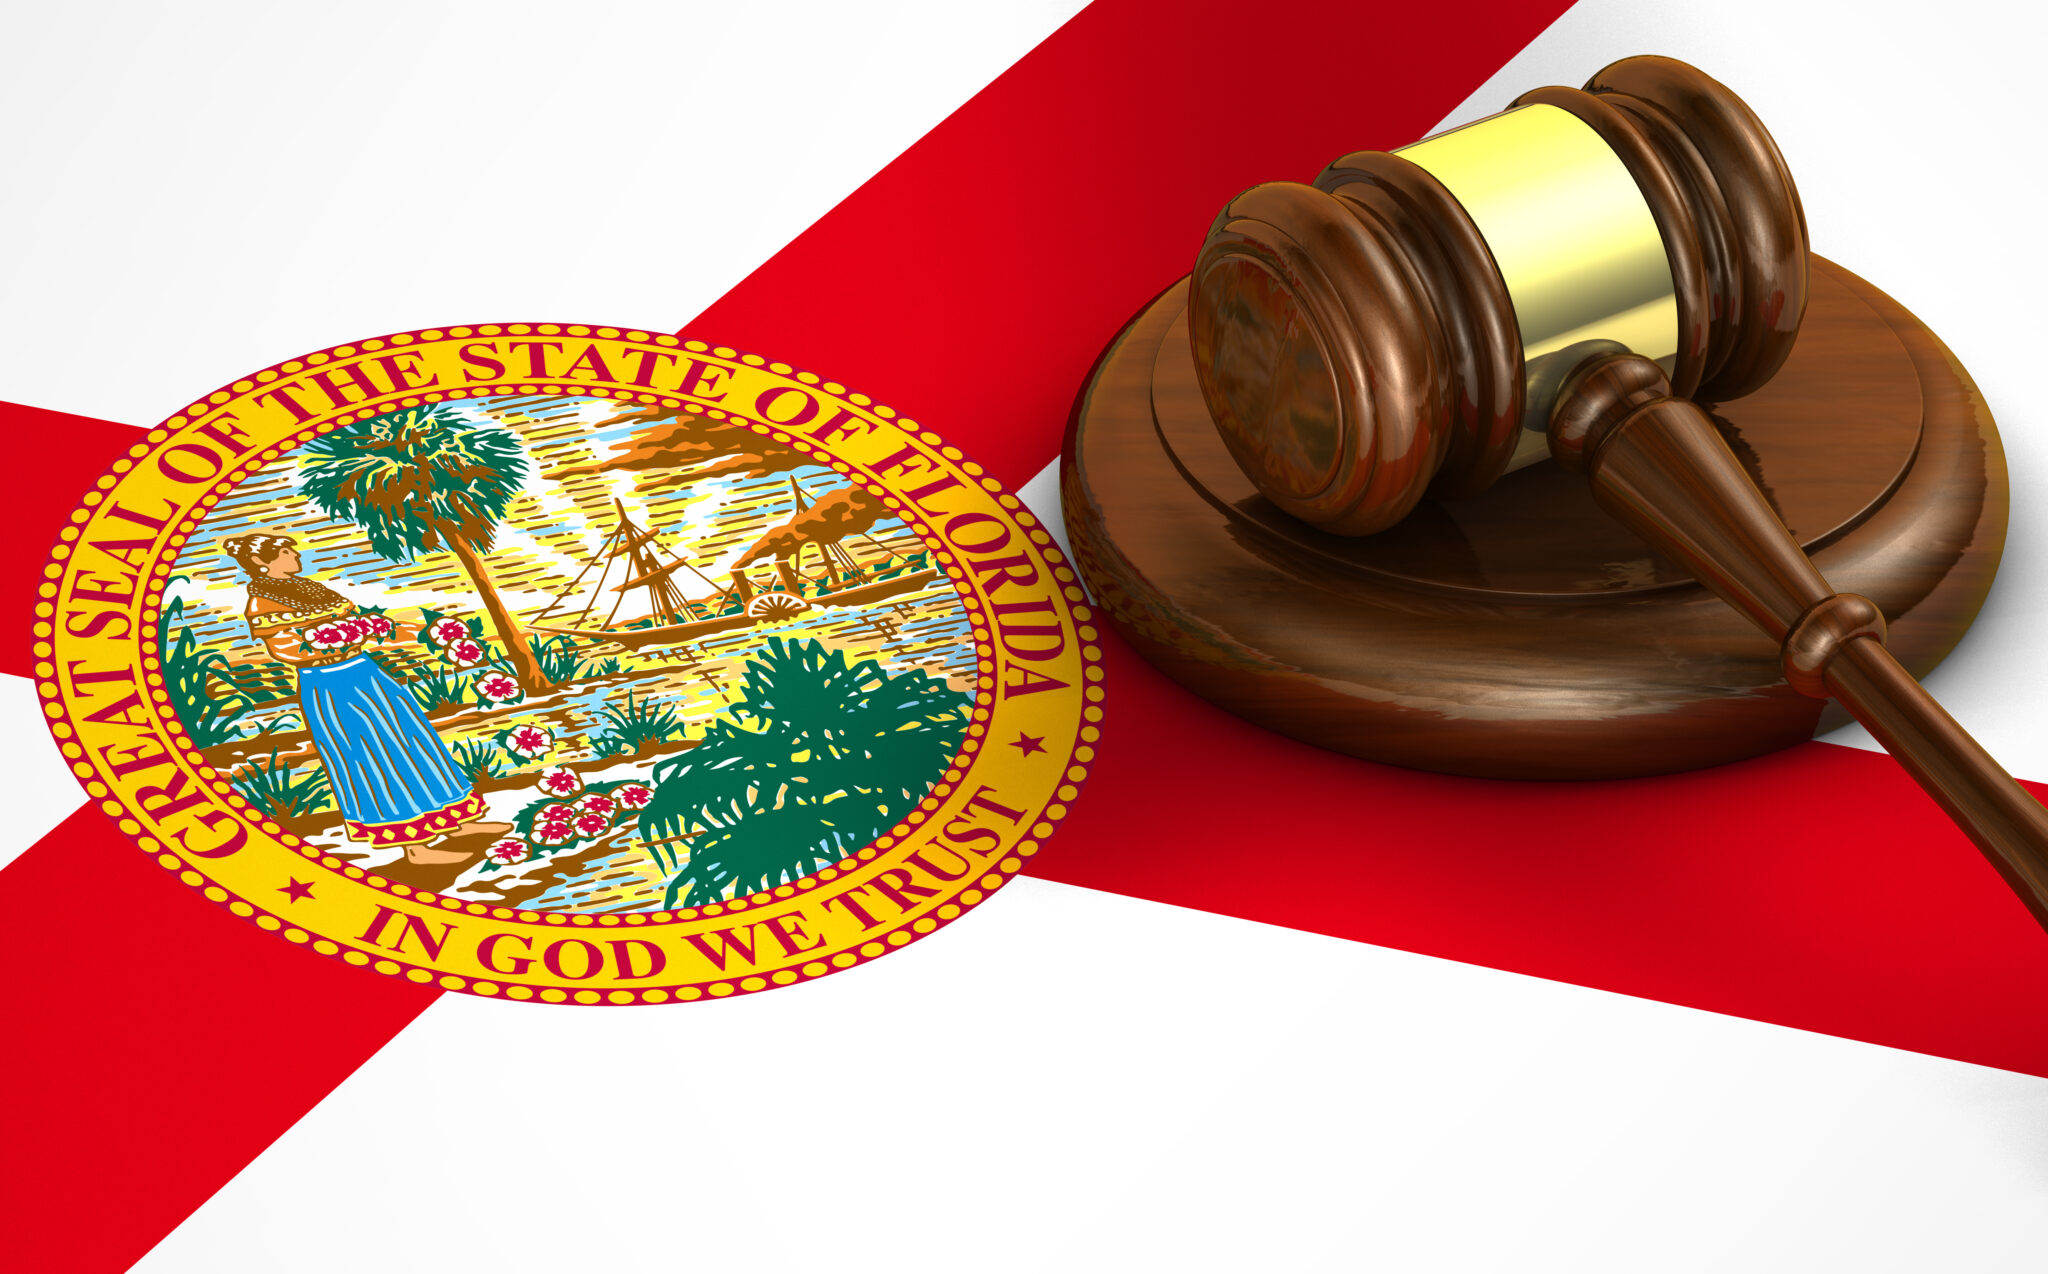 A judge 's gavel and seal of florida on top of the flag.